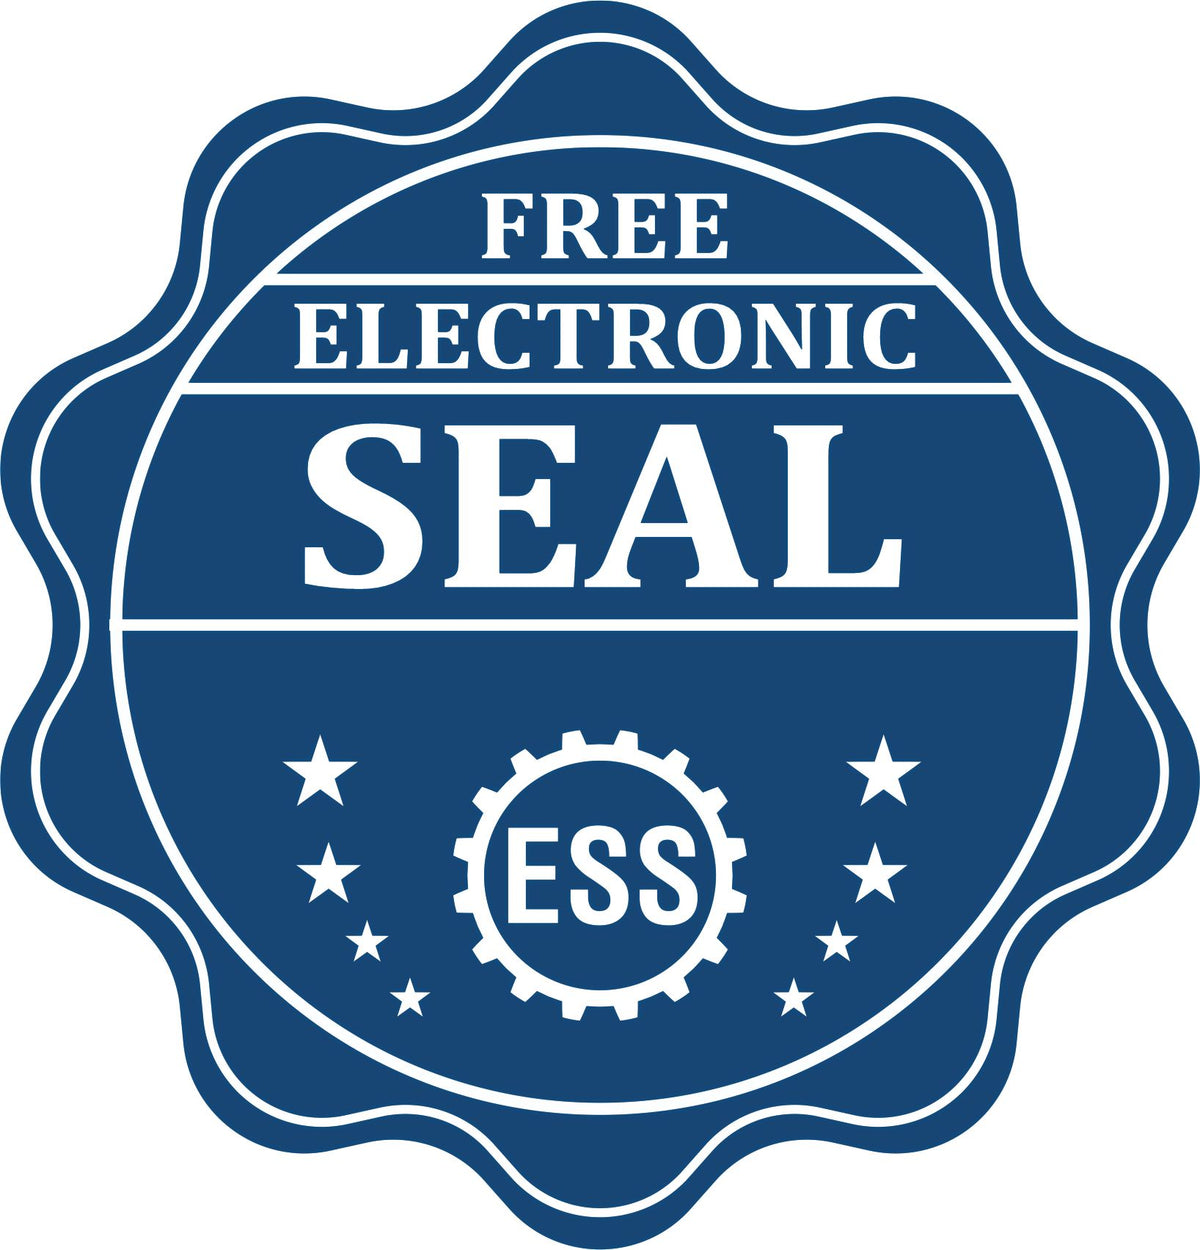 A badge showing a free electronic seal for the Premium MaxLight Pre-Inked Maine Landscape Architectural Stamp with stars and the ESS gear on the emblem.